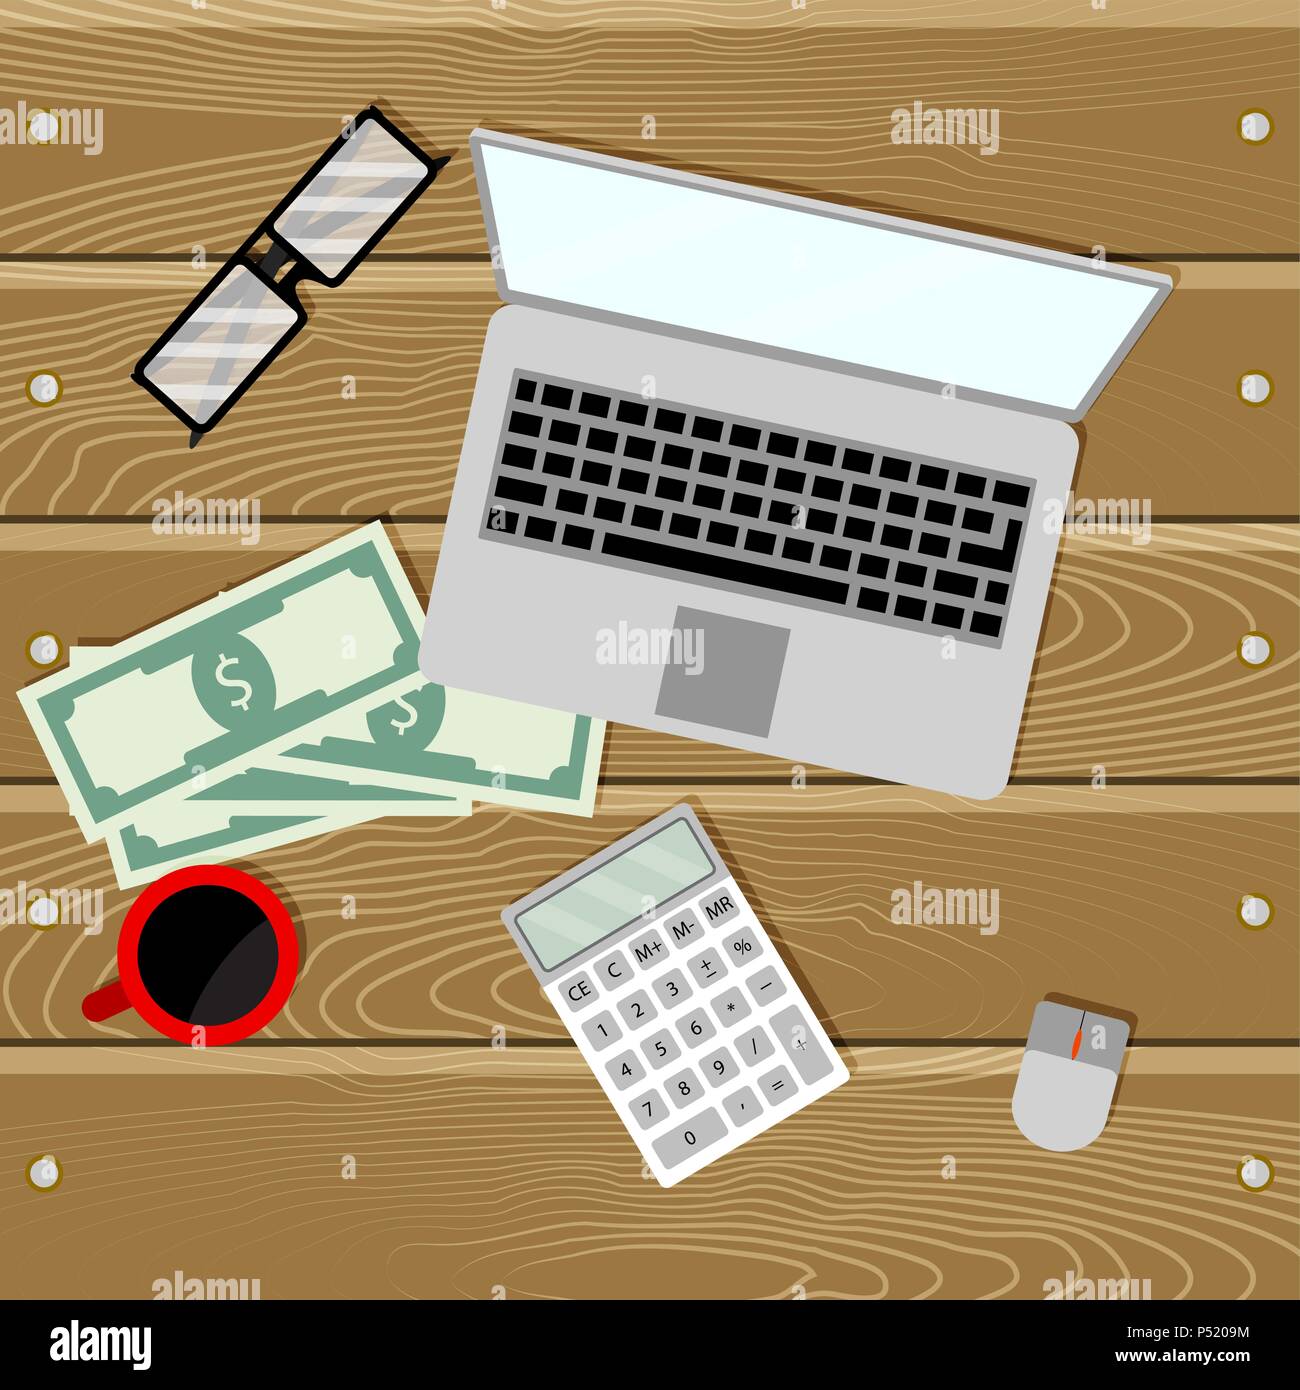 Financial audit on laptop. Business management, financial accounting. Vector illustration Stock Vector